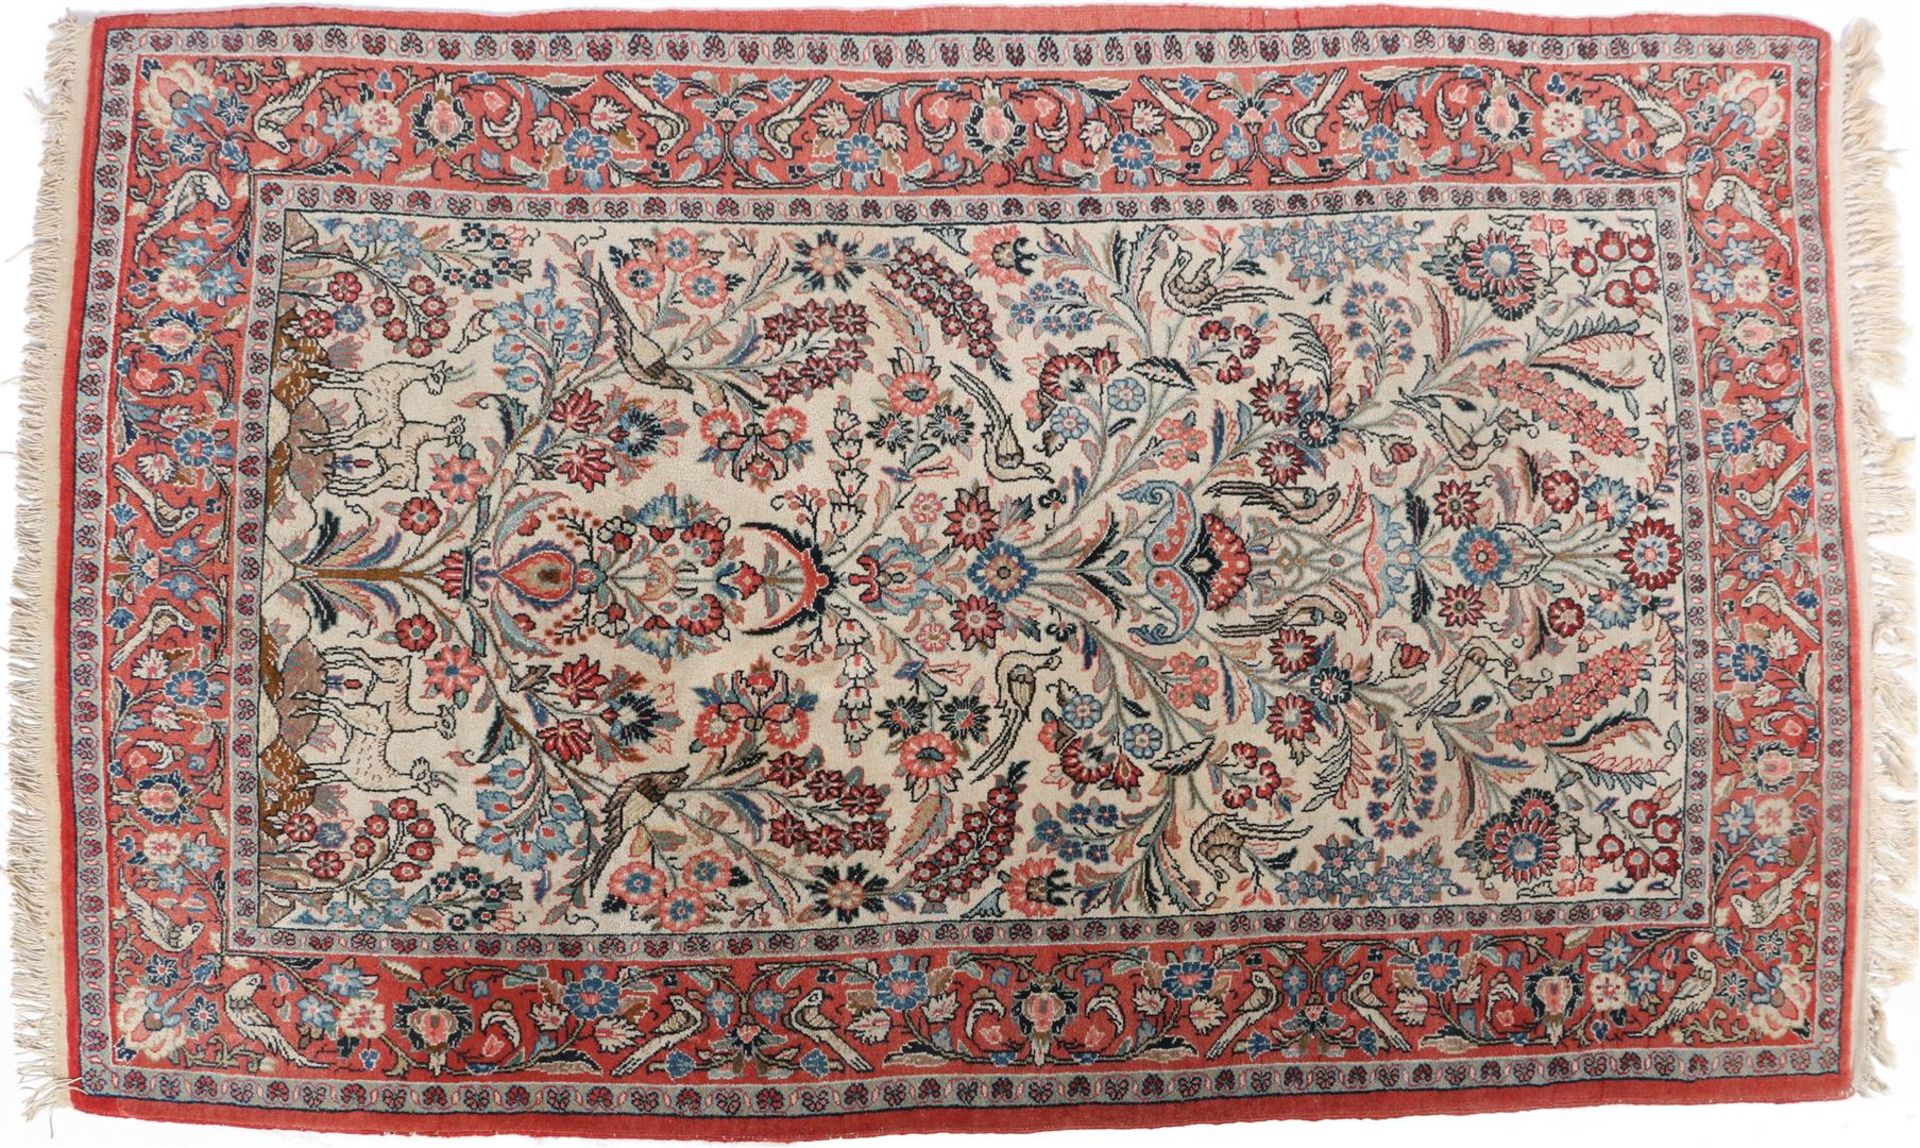 Hand-knotted Ispahan carpet